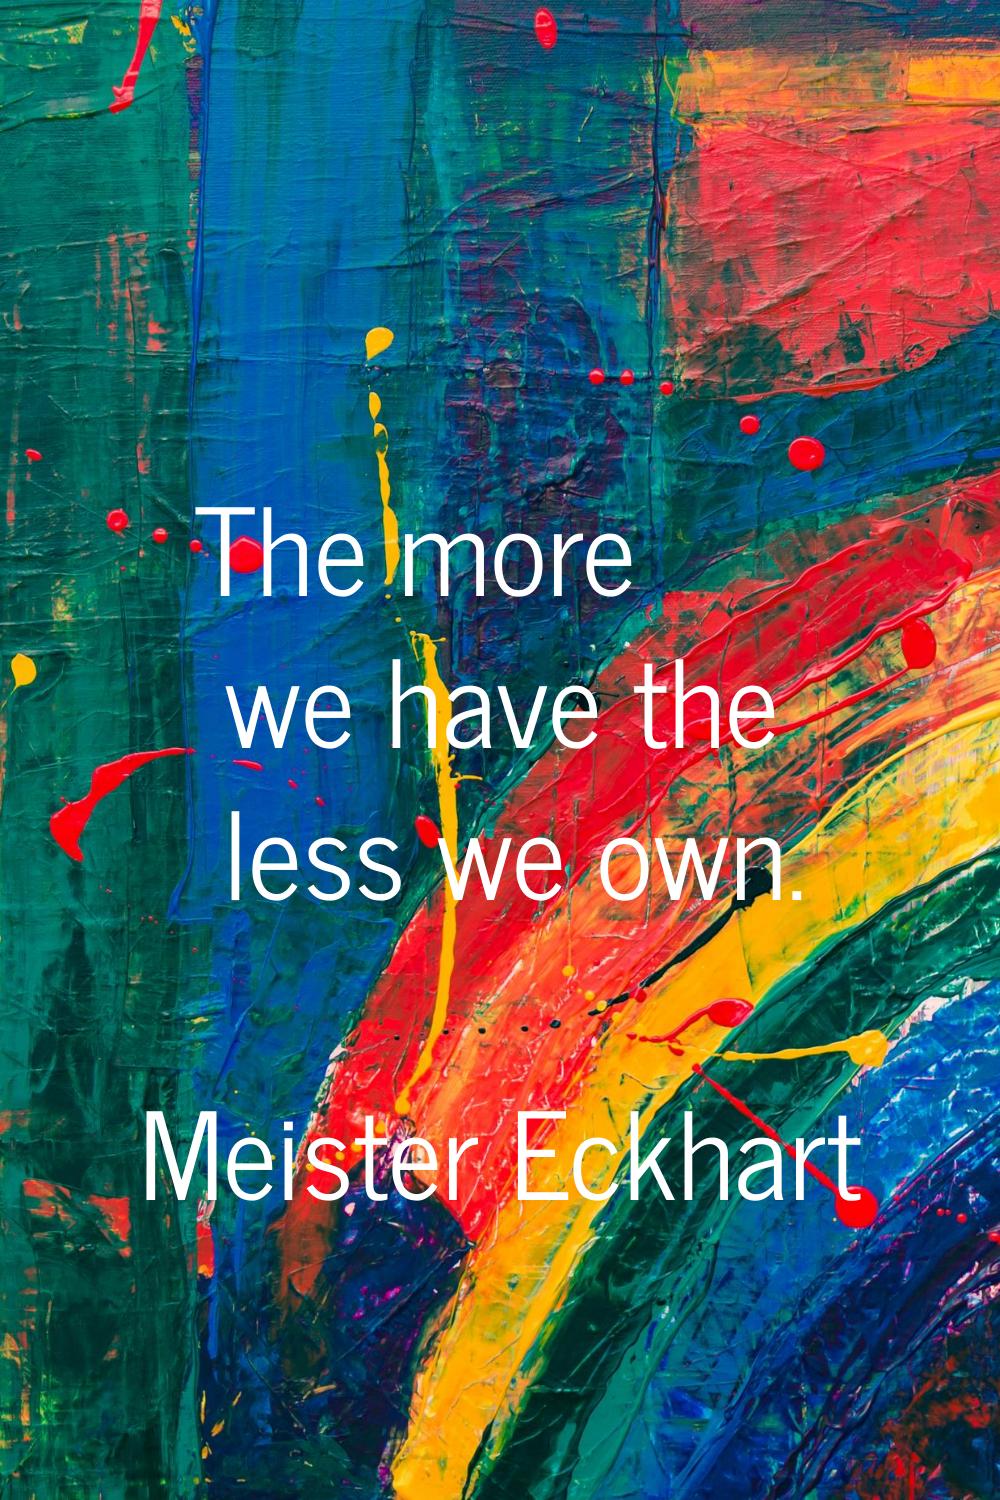 The more we have the less we own.